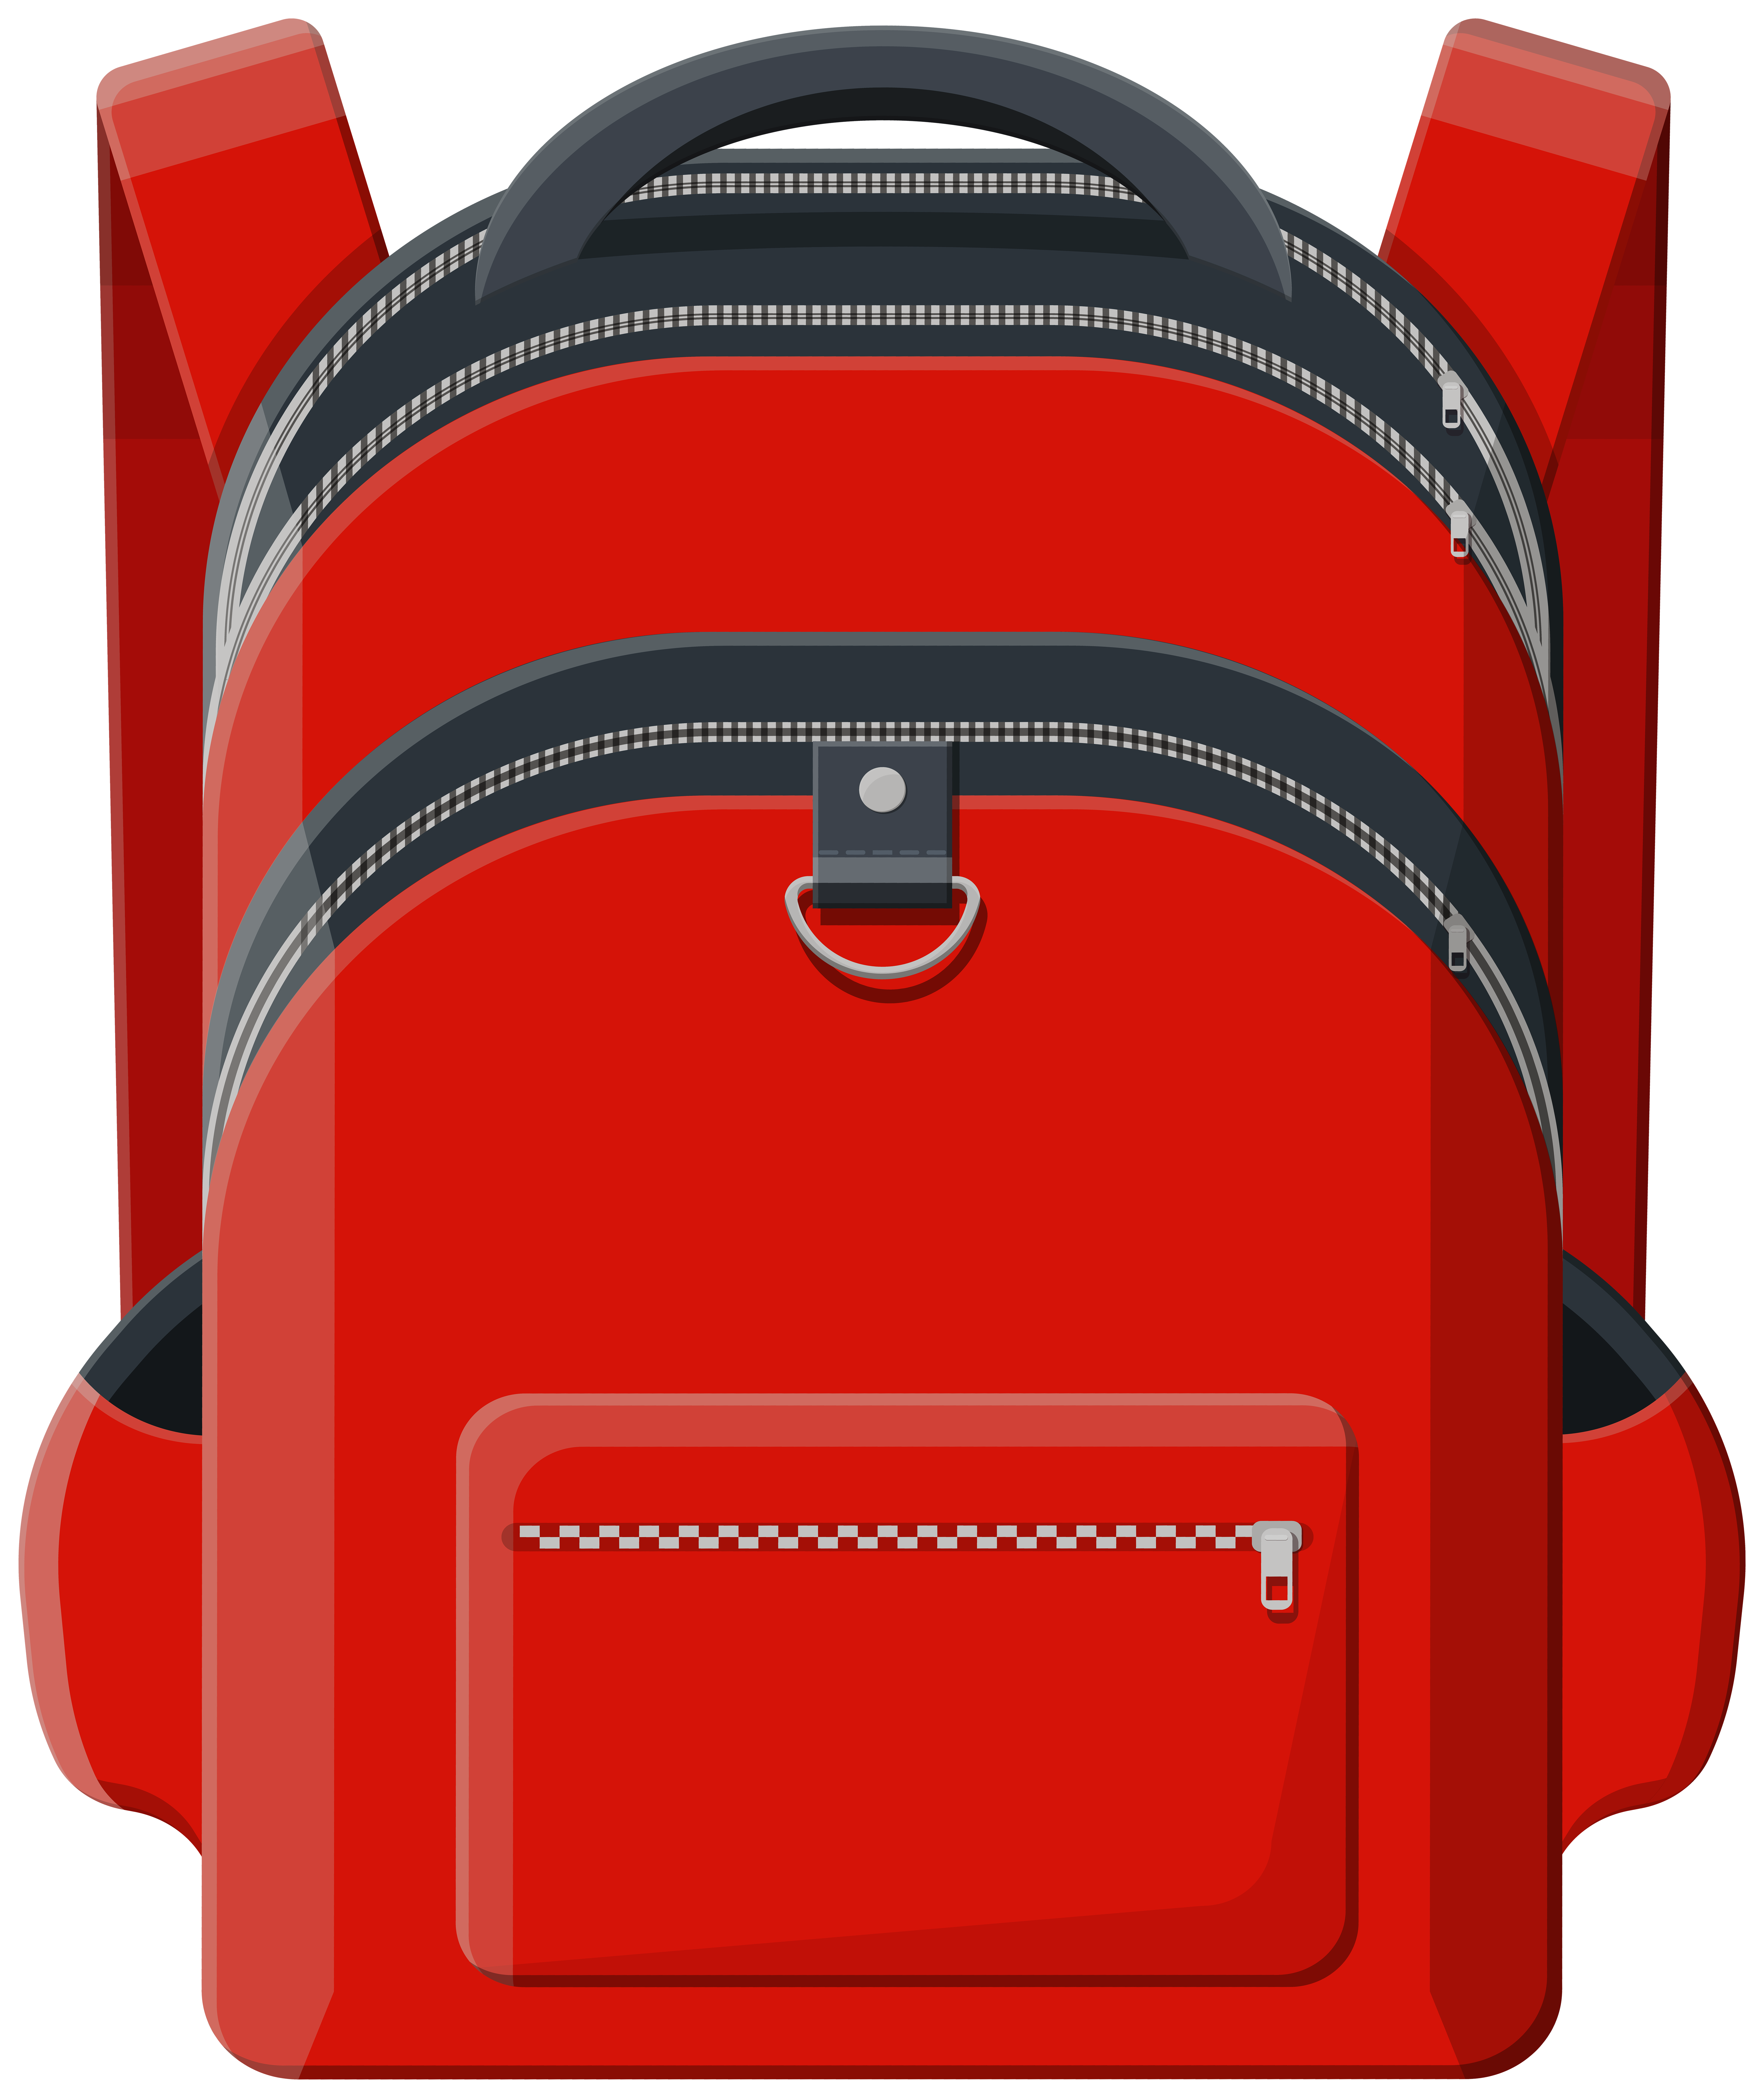 Red Backpack PNG Clipart